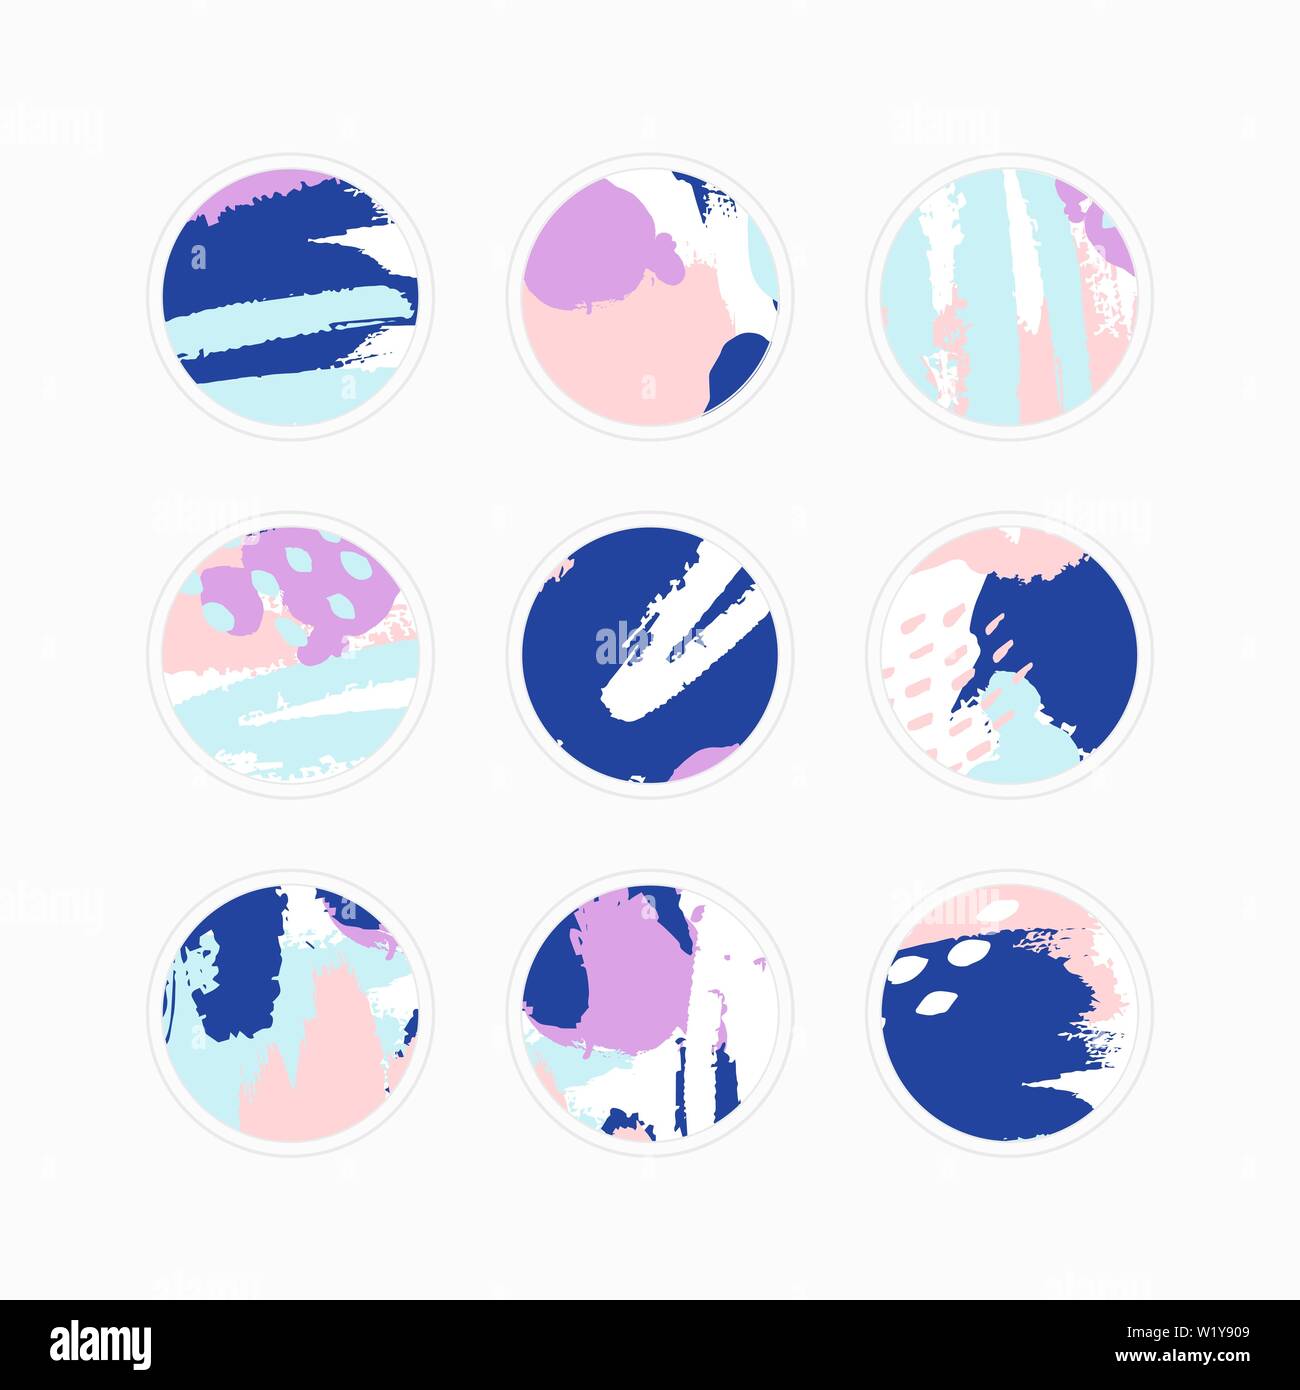 Vector set of abstract Highlight covers backgrounds. Design templates icons for social media stories. Round emblems of colorful bright Brush stroke . Stock Vector